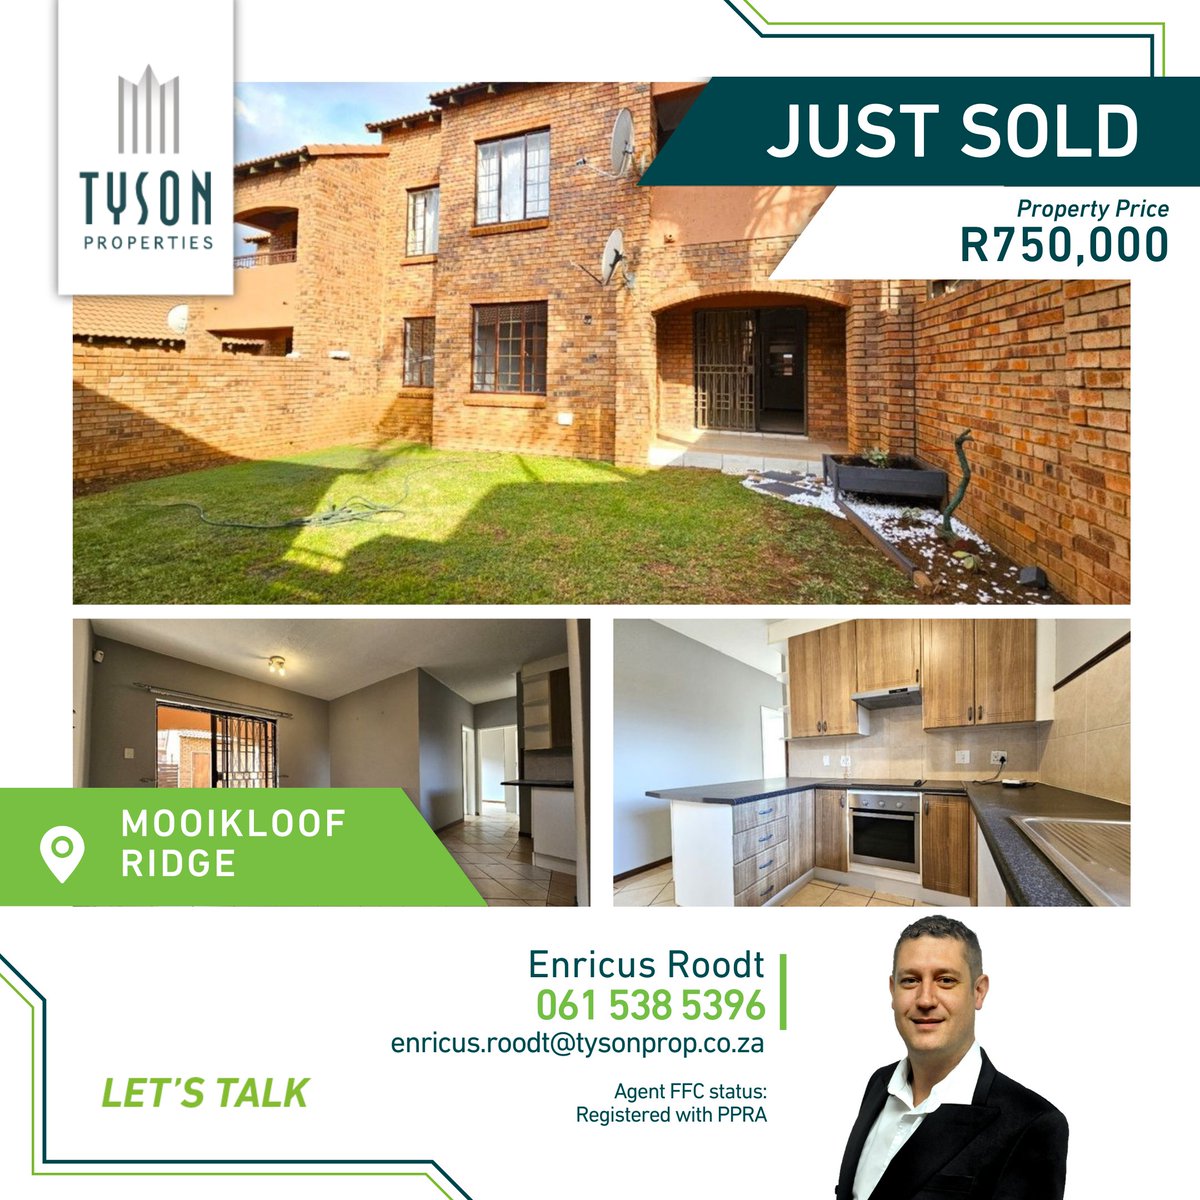 📍JUST SOLD in Mooikloof Ridge🏆
Contact Enricus Roodt today for all your real estate needs in Mooikloof Ridge🏠
View my property listings here:
bit.ly/3CB5yu6
#mkr #enricusroodt #mooikloofridge #tysonpropertiespta #expectmore